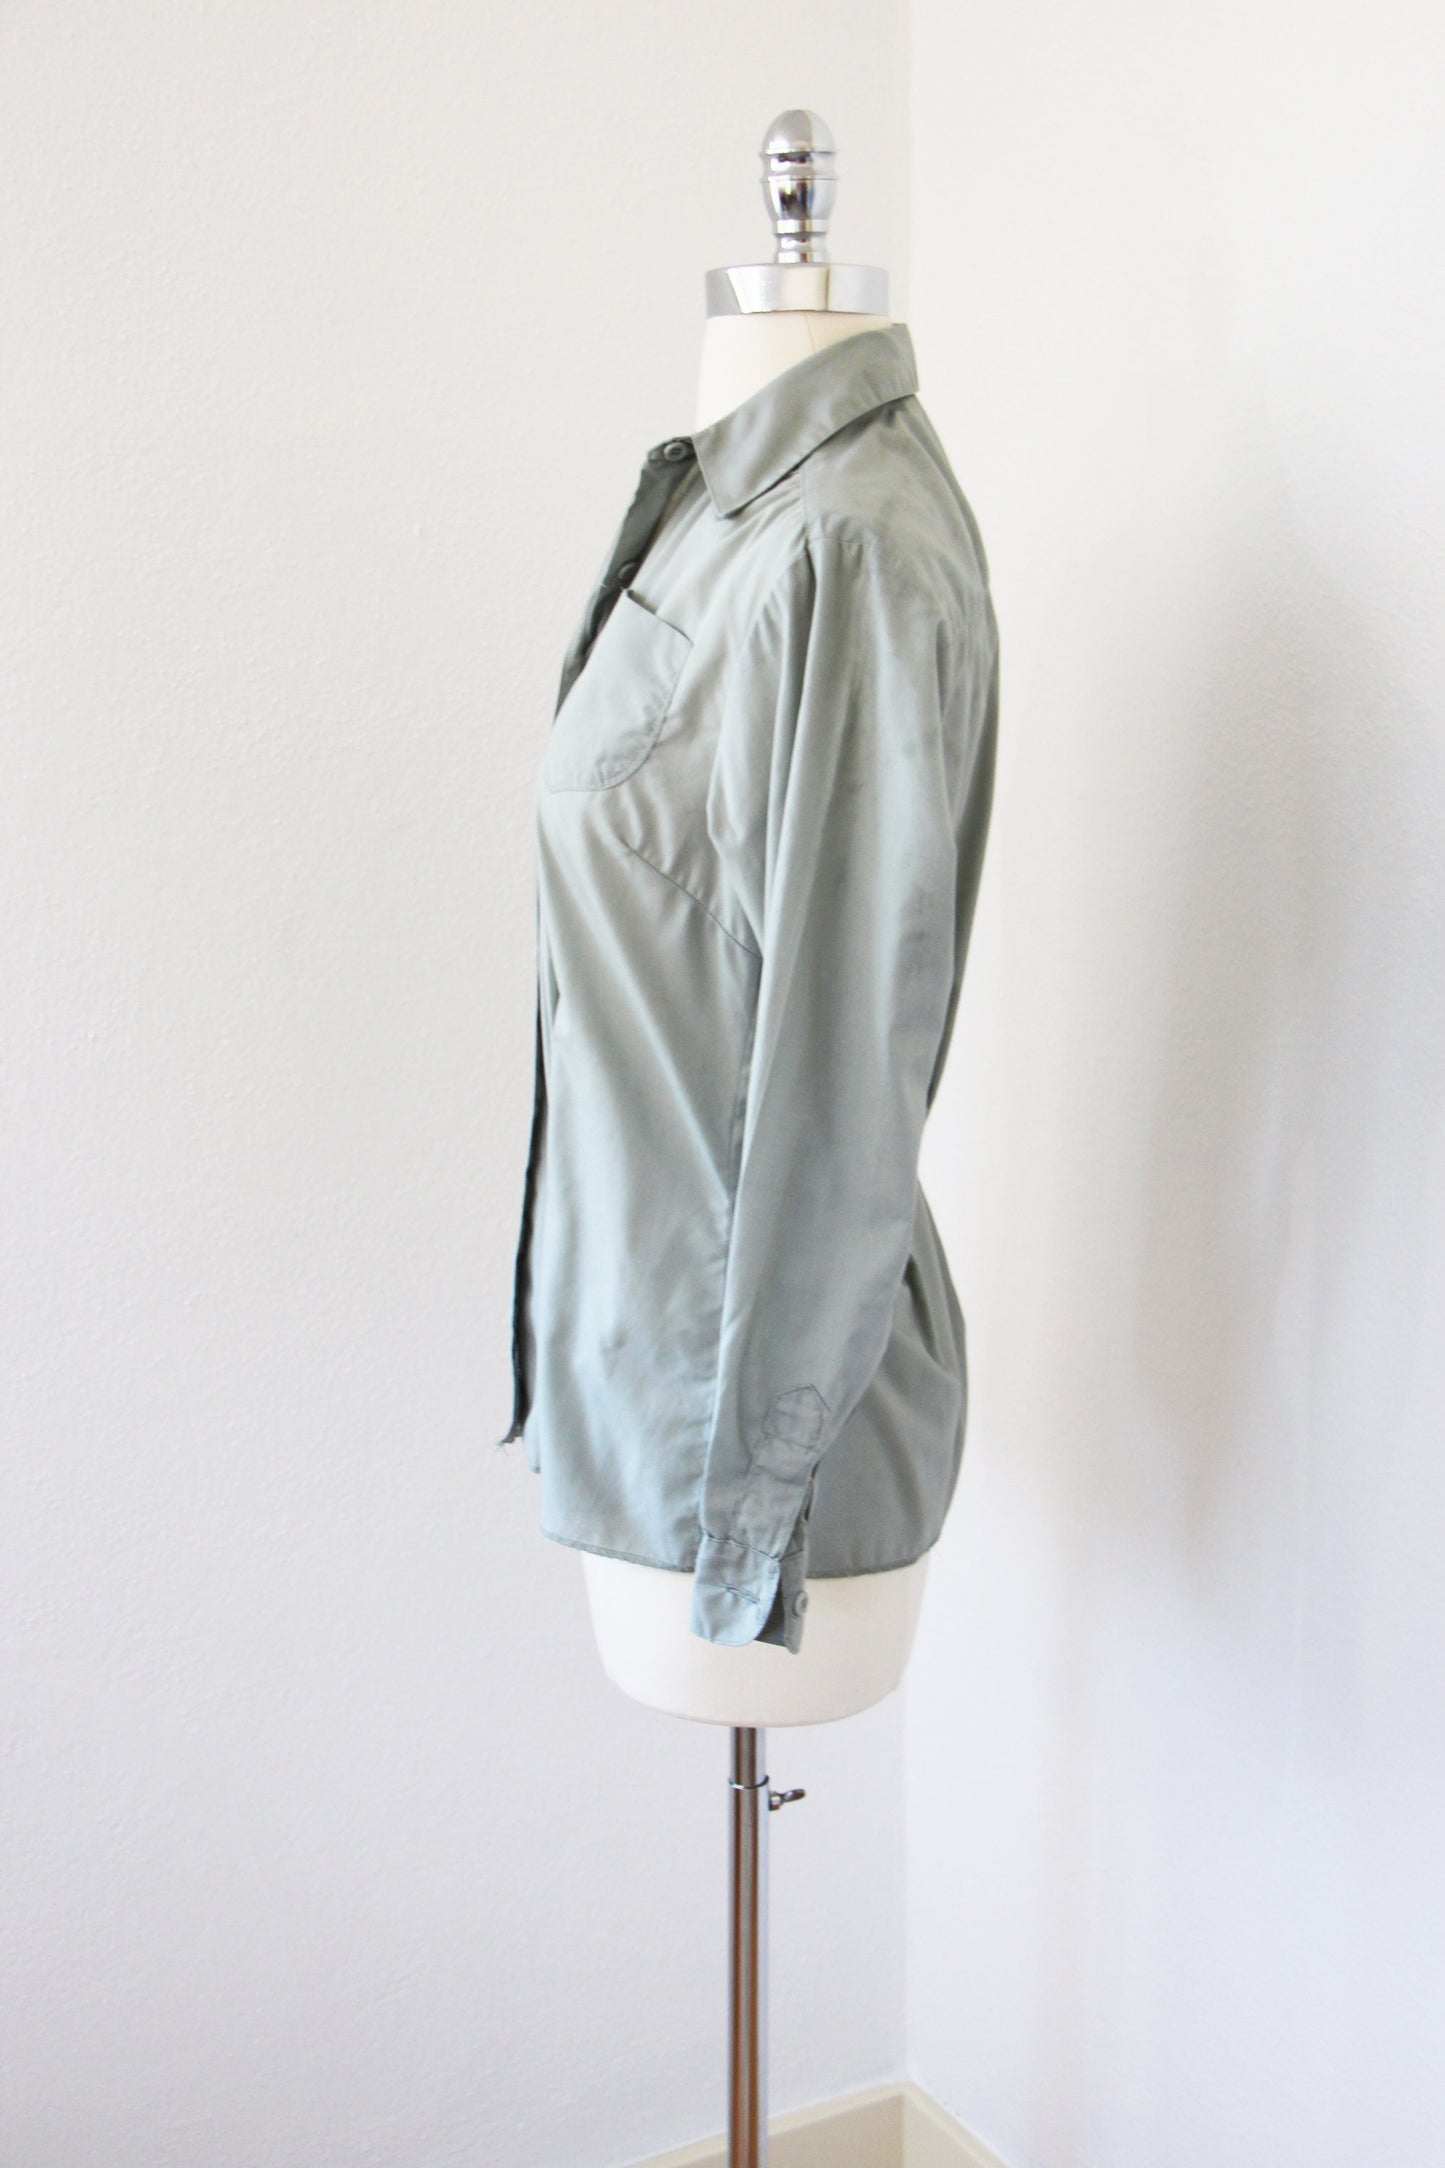 Vintage 1970s Marine Corps Blouse Military USMC Uniform Tapered Cotton Blend Shirt in Pale Misty Green Grey - Choose Your Size